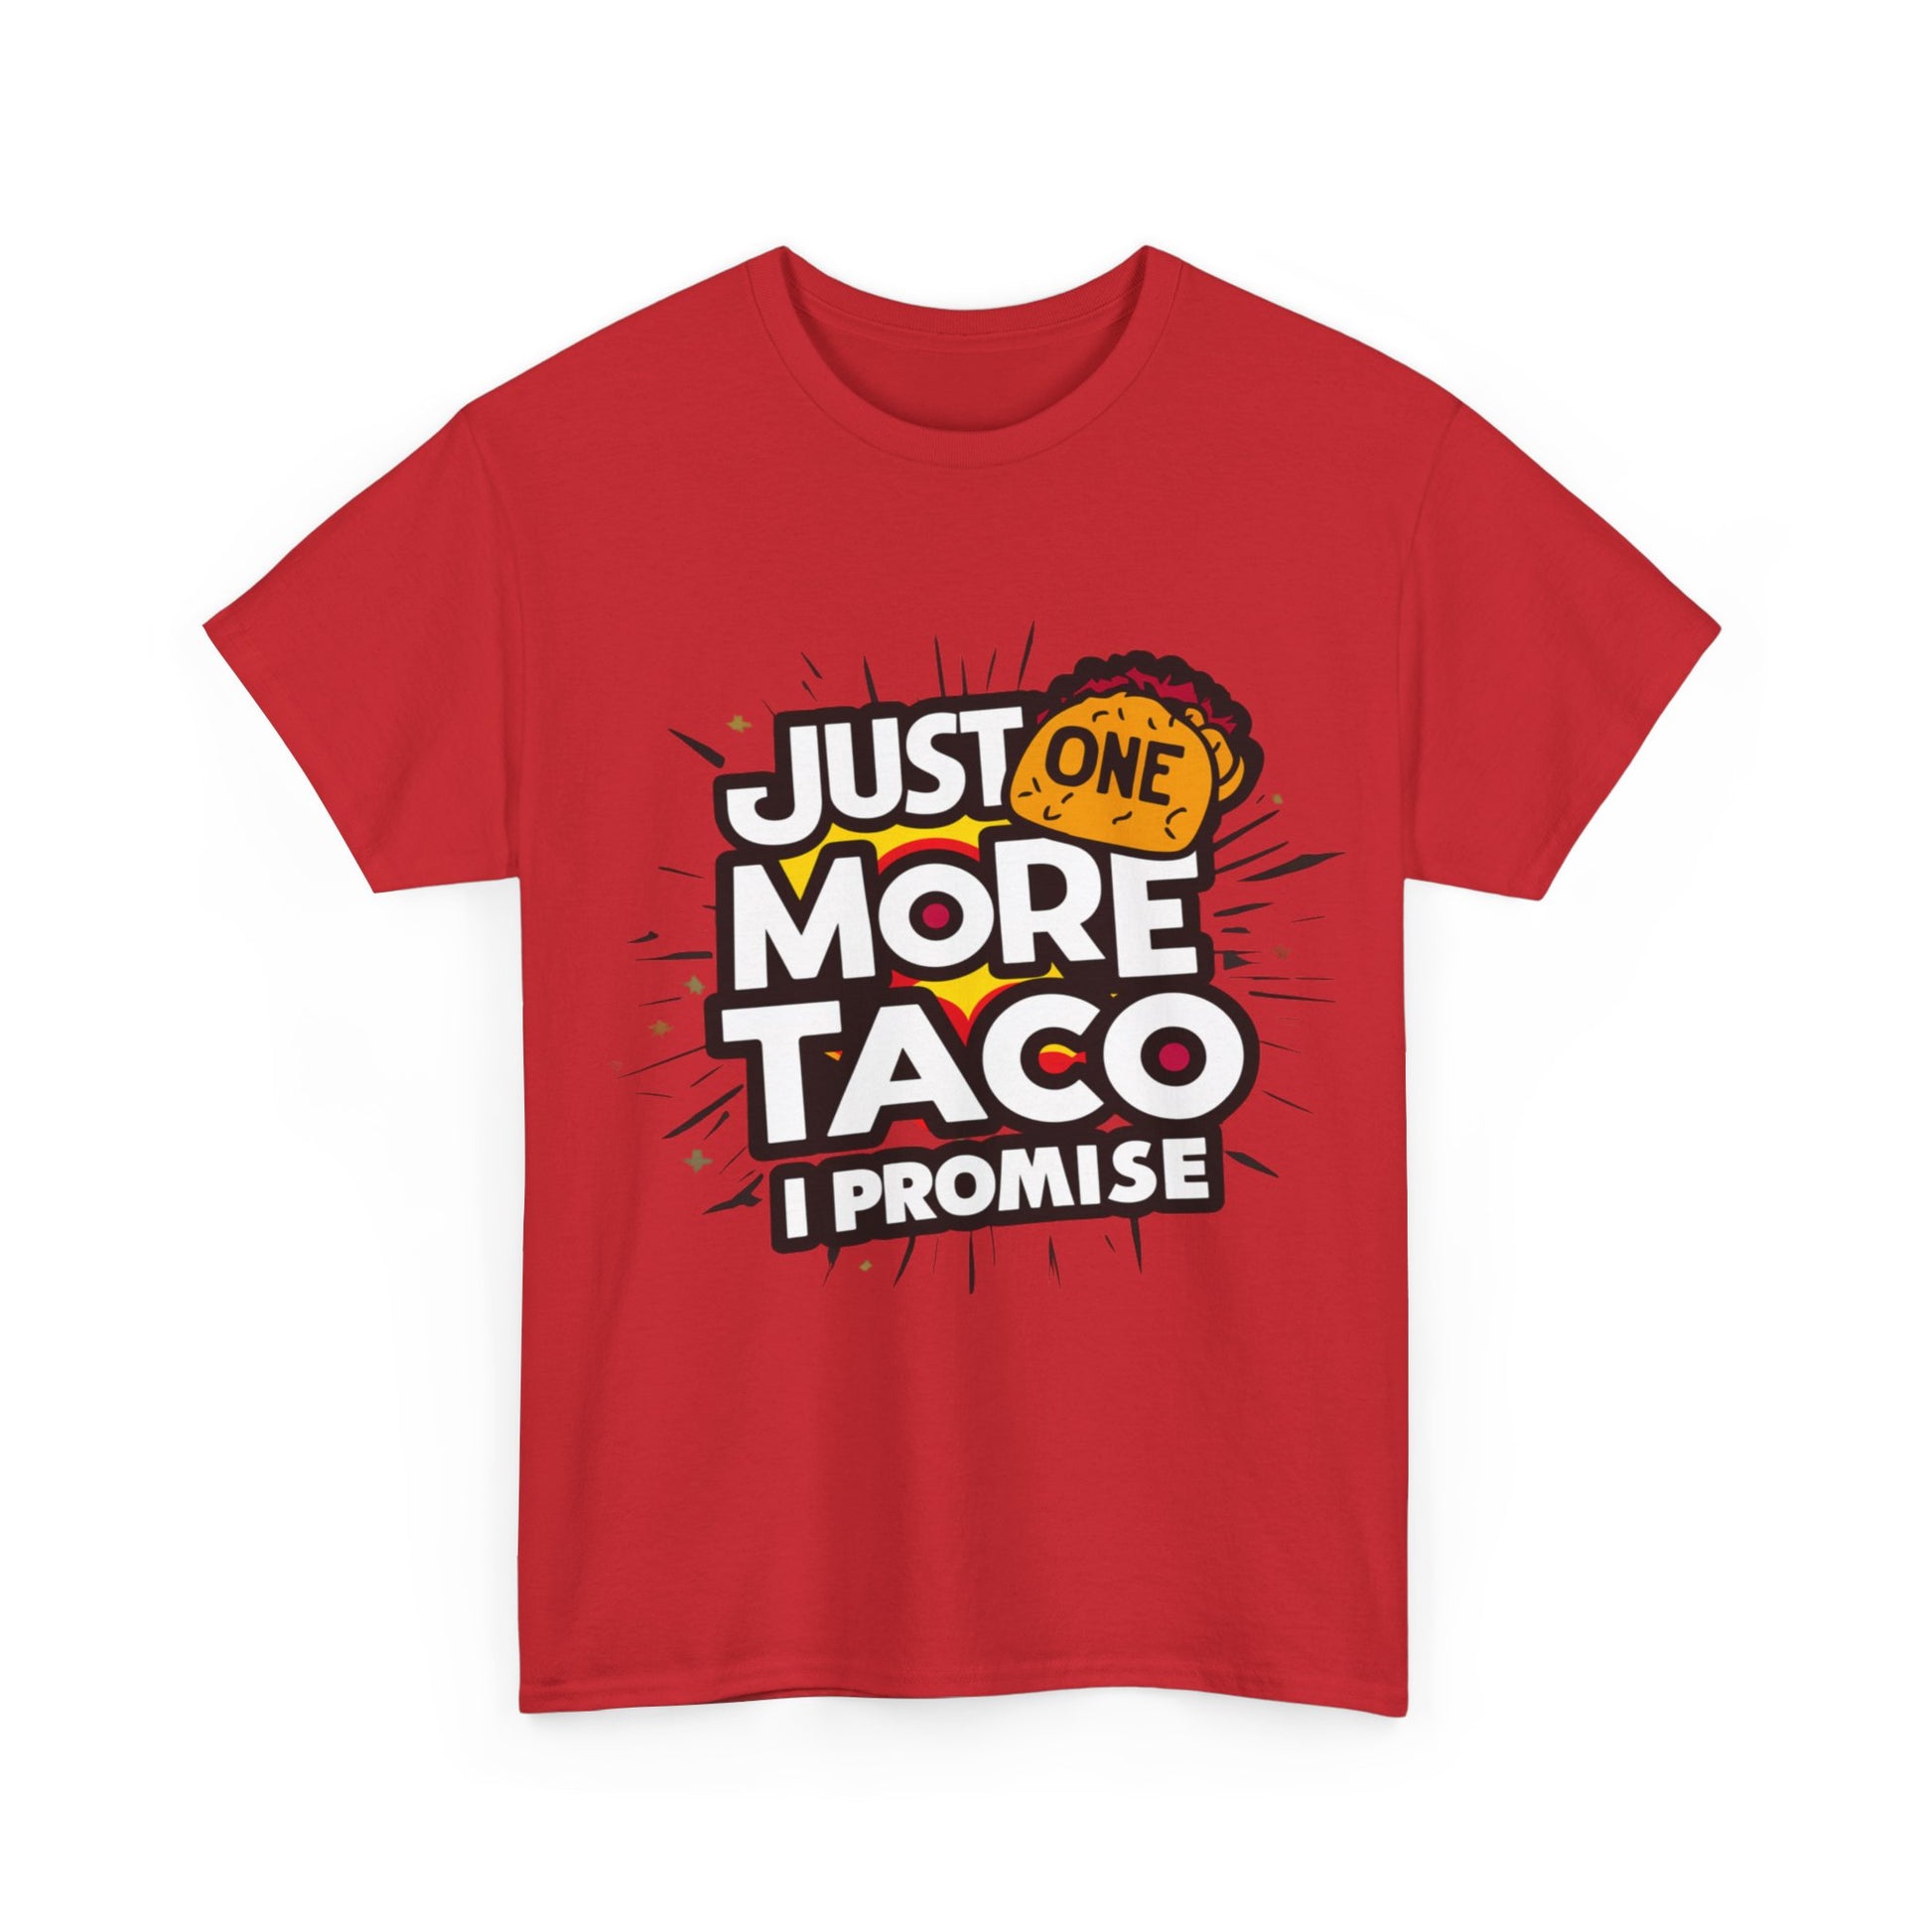 Copy of Just One More Taco I Promise Mexican Food Graphic Unisex Heavy Cotton Tee Cotton Funny Humorous Graphic Soft Premium Unisex Men Women Red T-shirt Birthday Gift-33